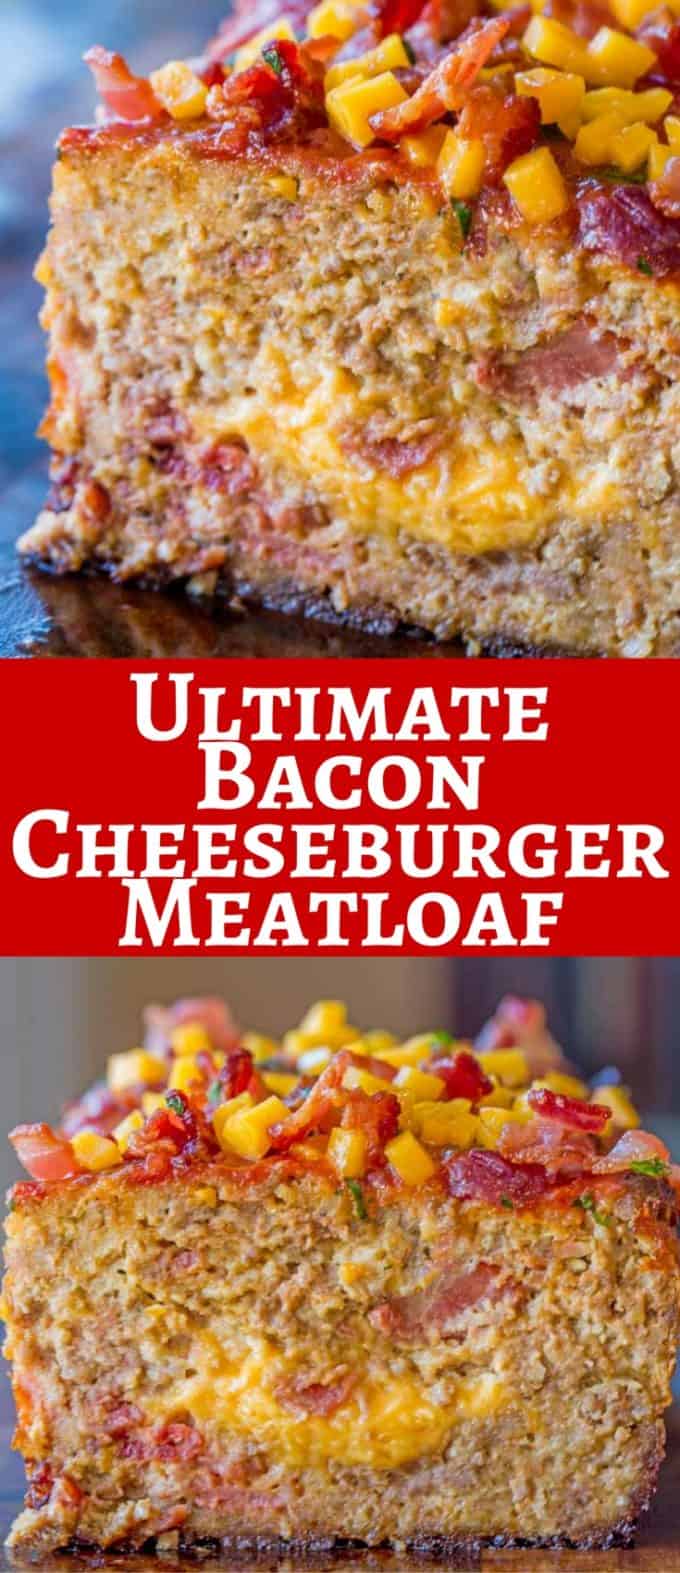 We LOVED this Bacon Cheeseburger Meatloaf so much we made it again the next night!